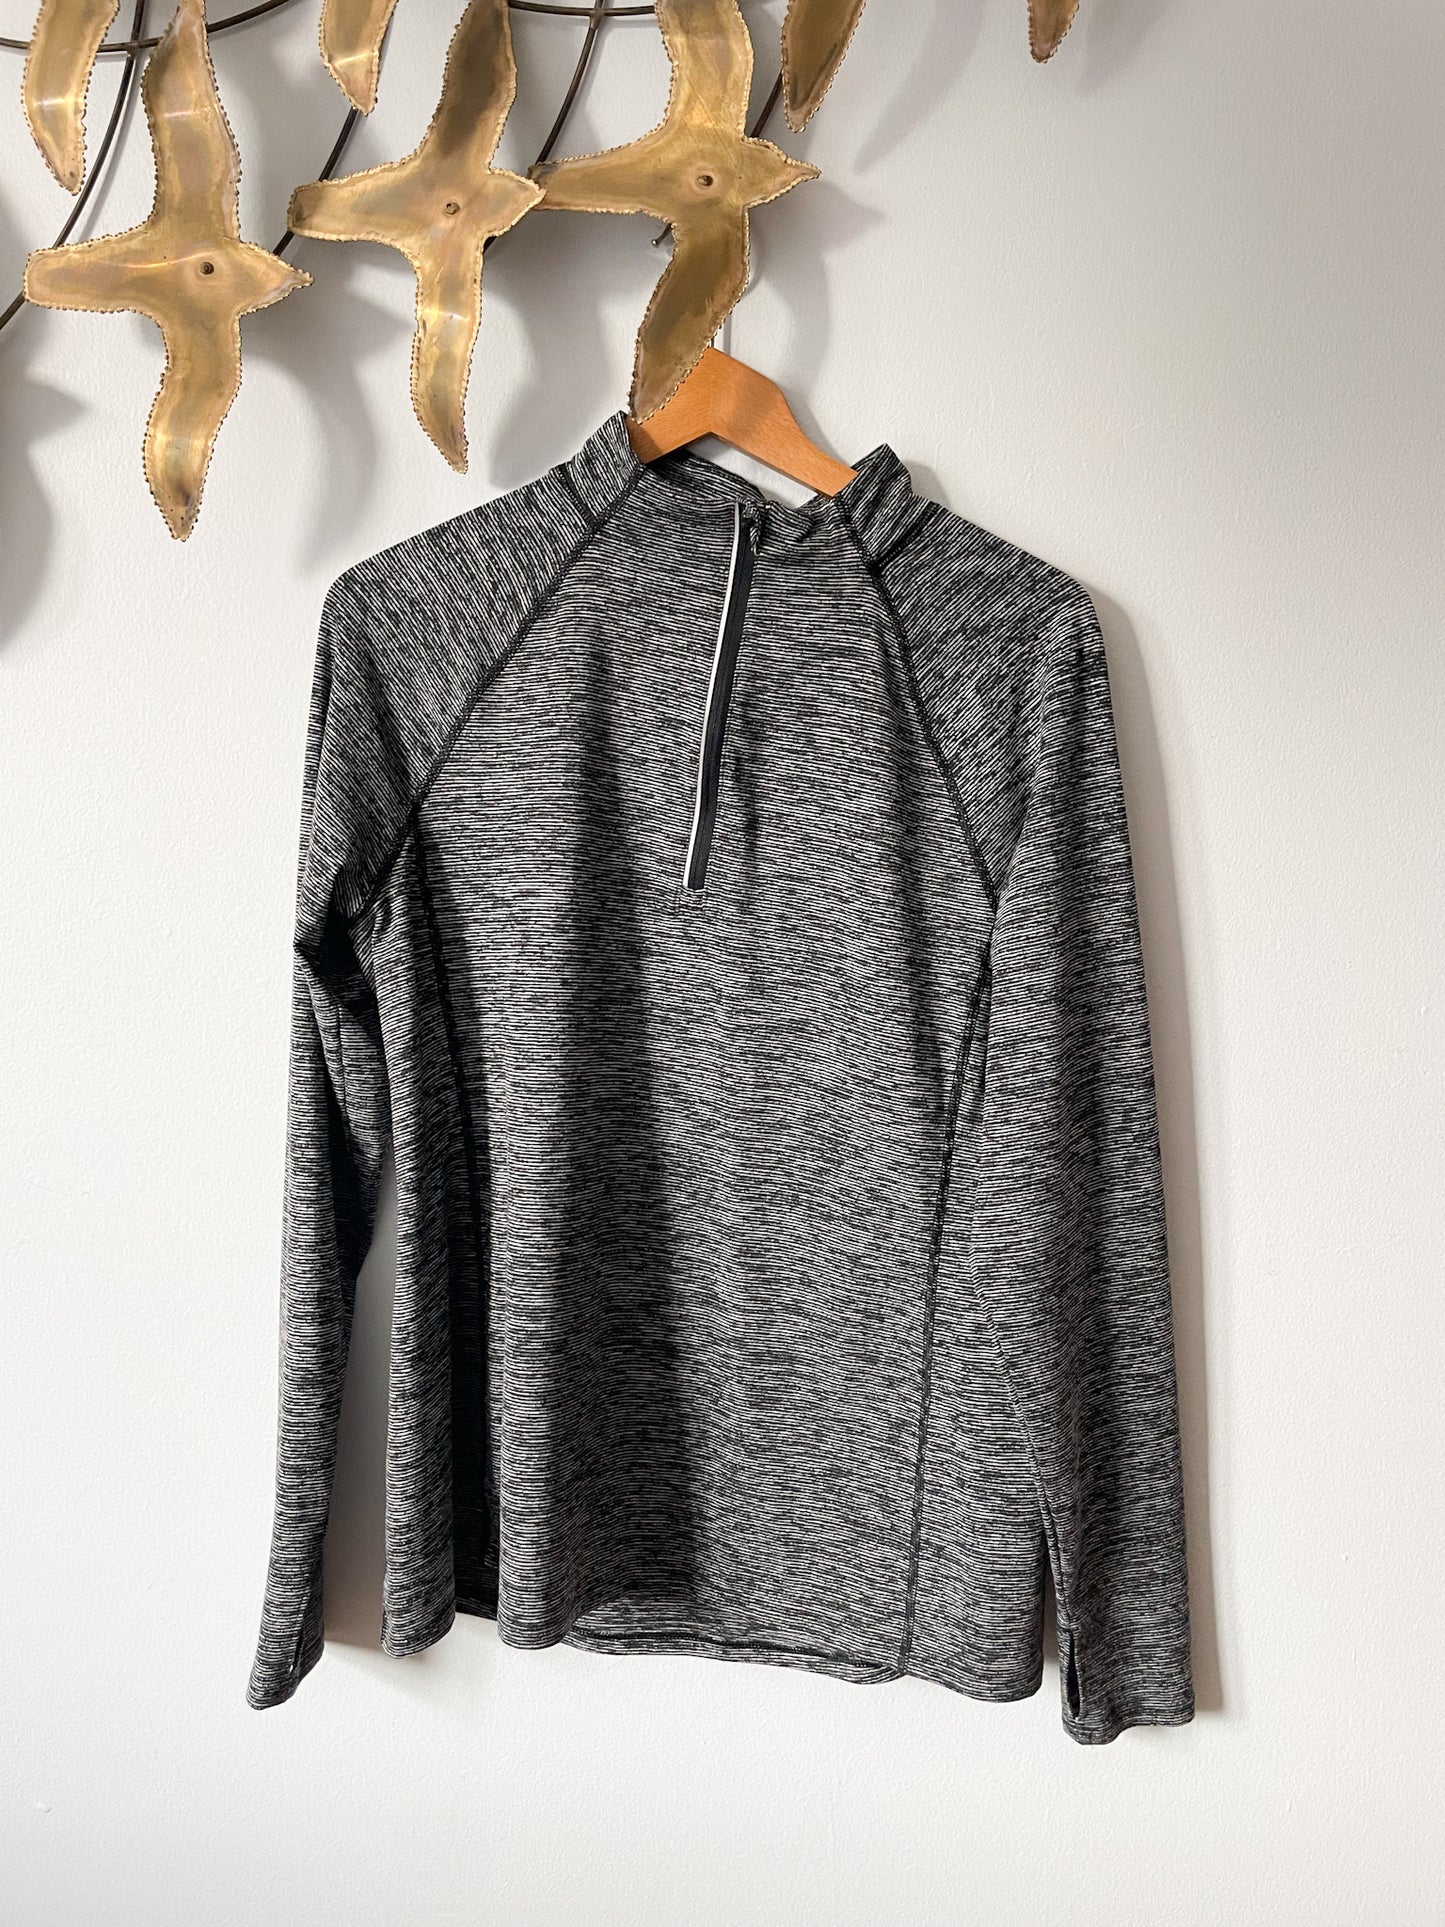 Old Navy Grey Quarter-Zip Performance Reflective Long Sleeve Top - Large